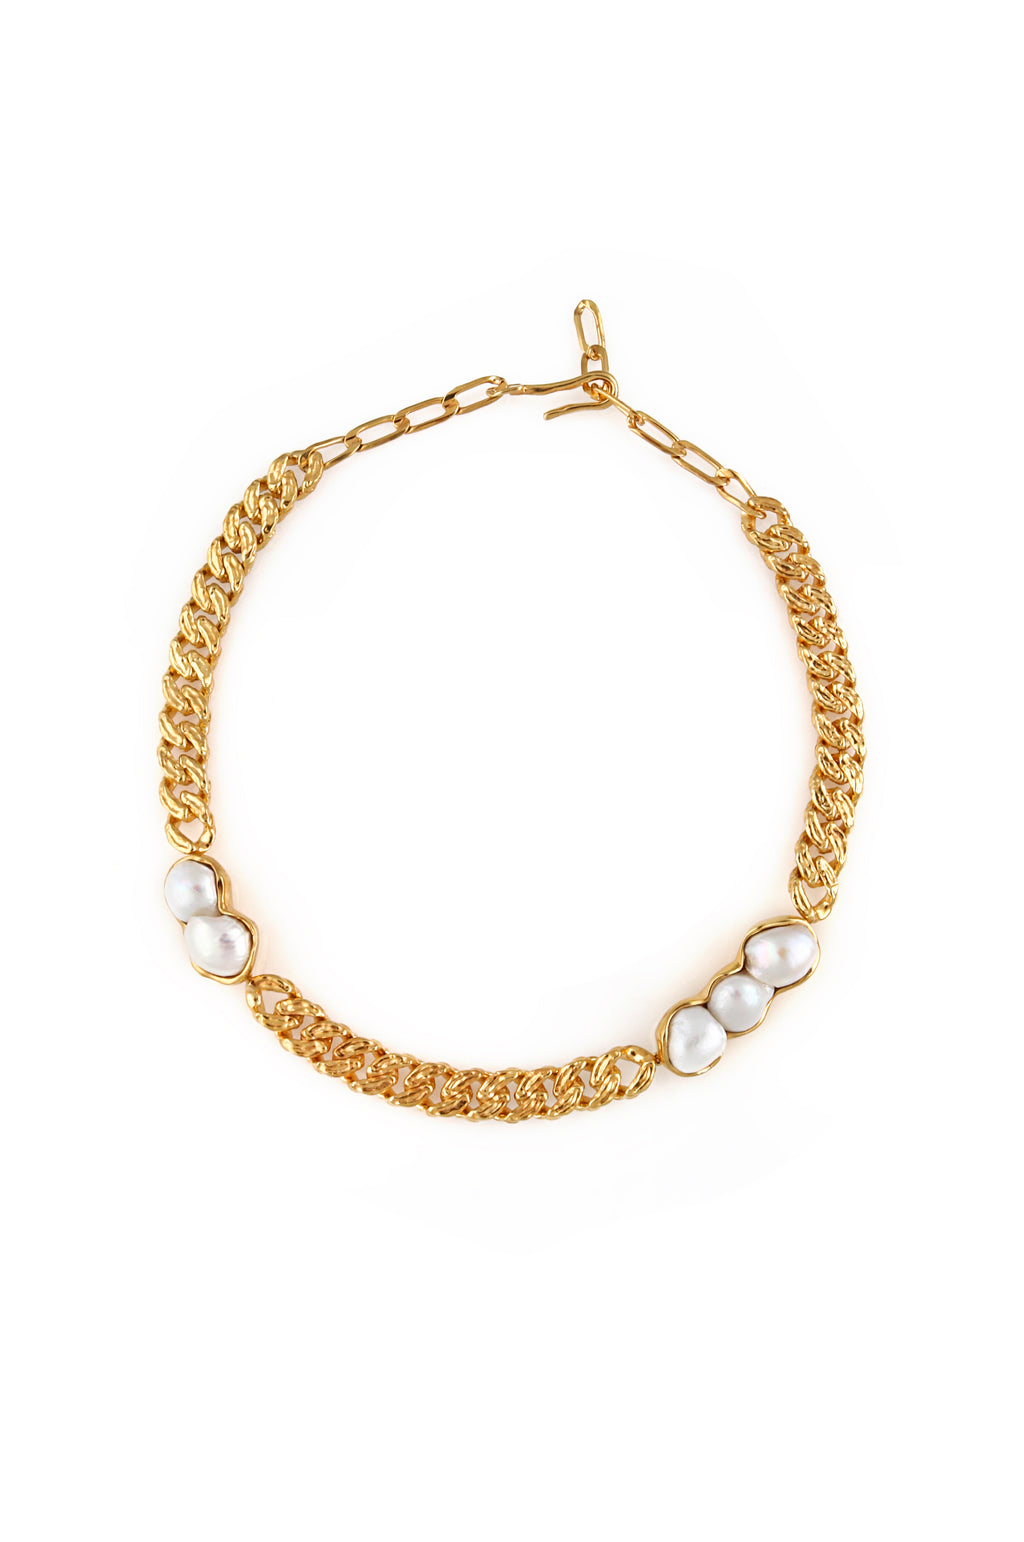 STATEMENT CHAIN NECKLACE WITH CULTURED PEARLS